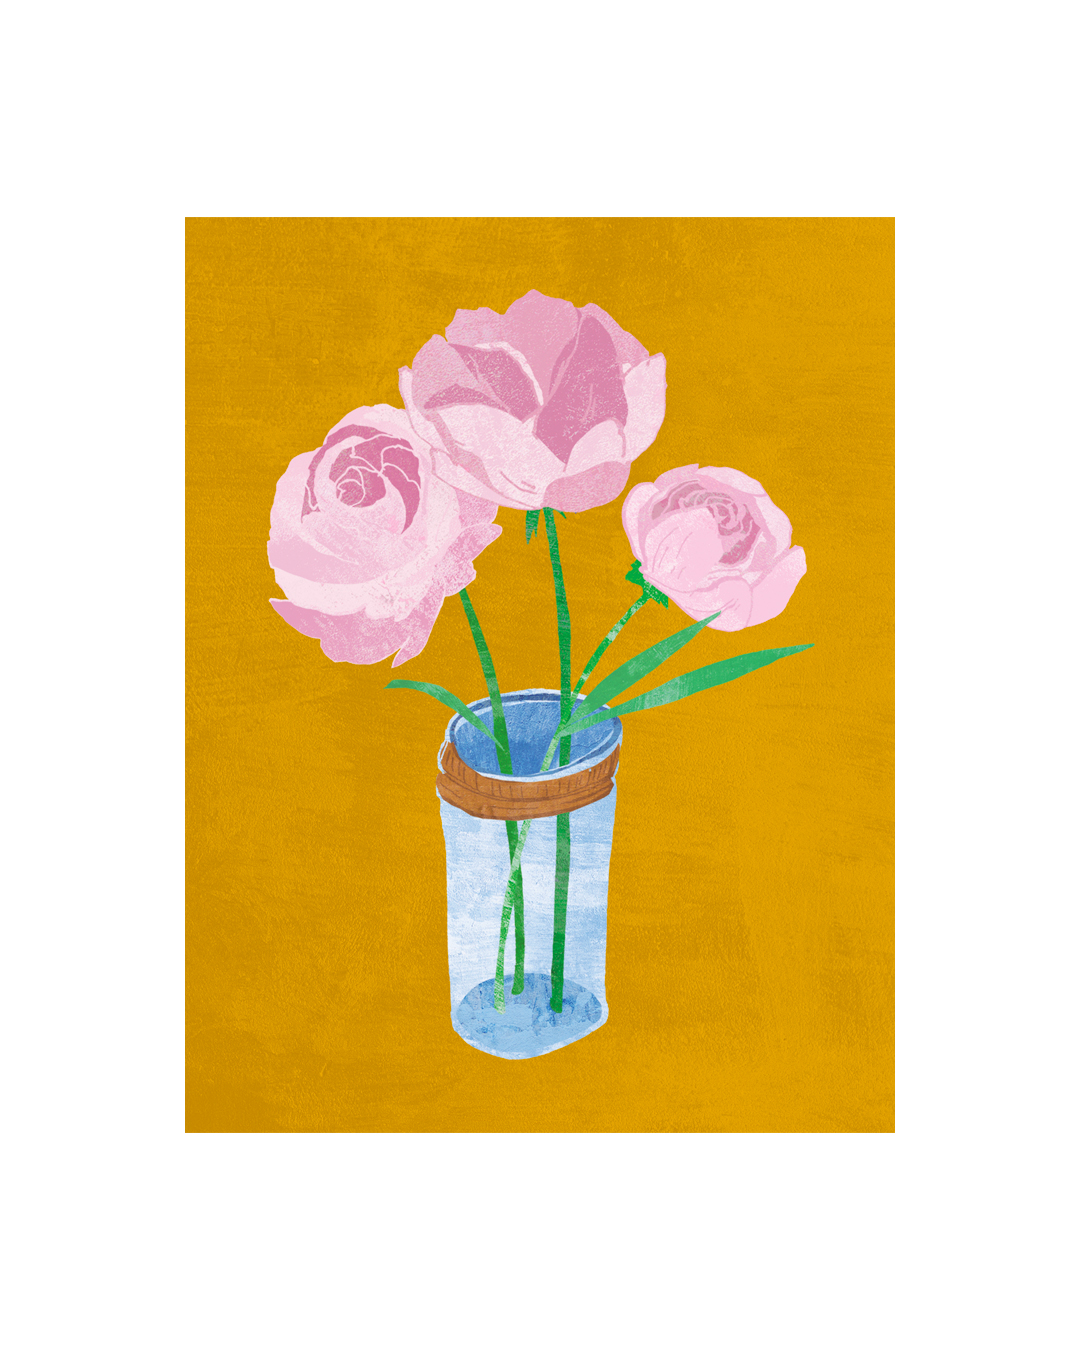 Peonies illustration by Lizzy Doe